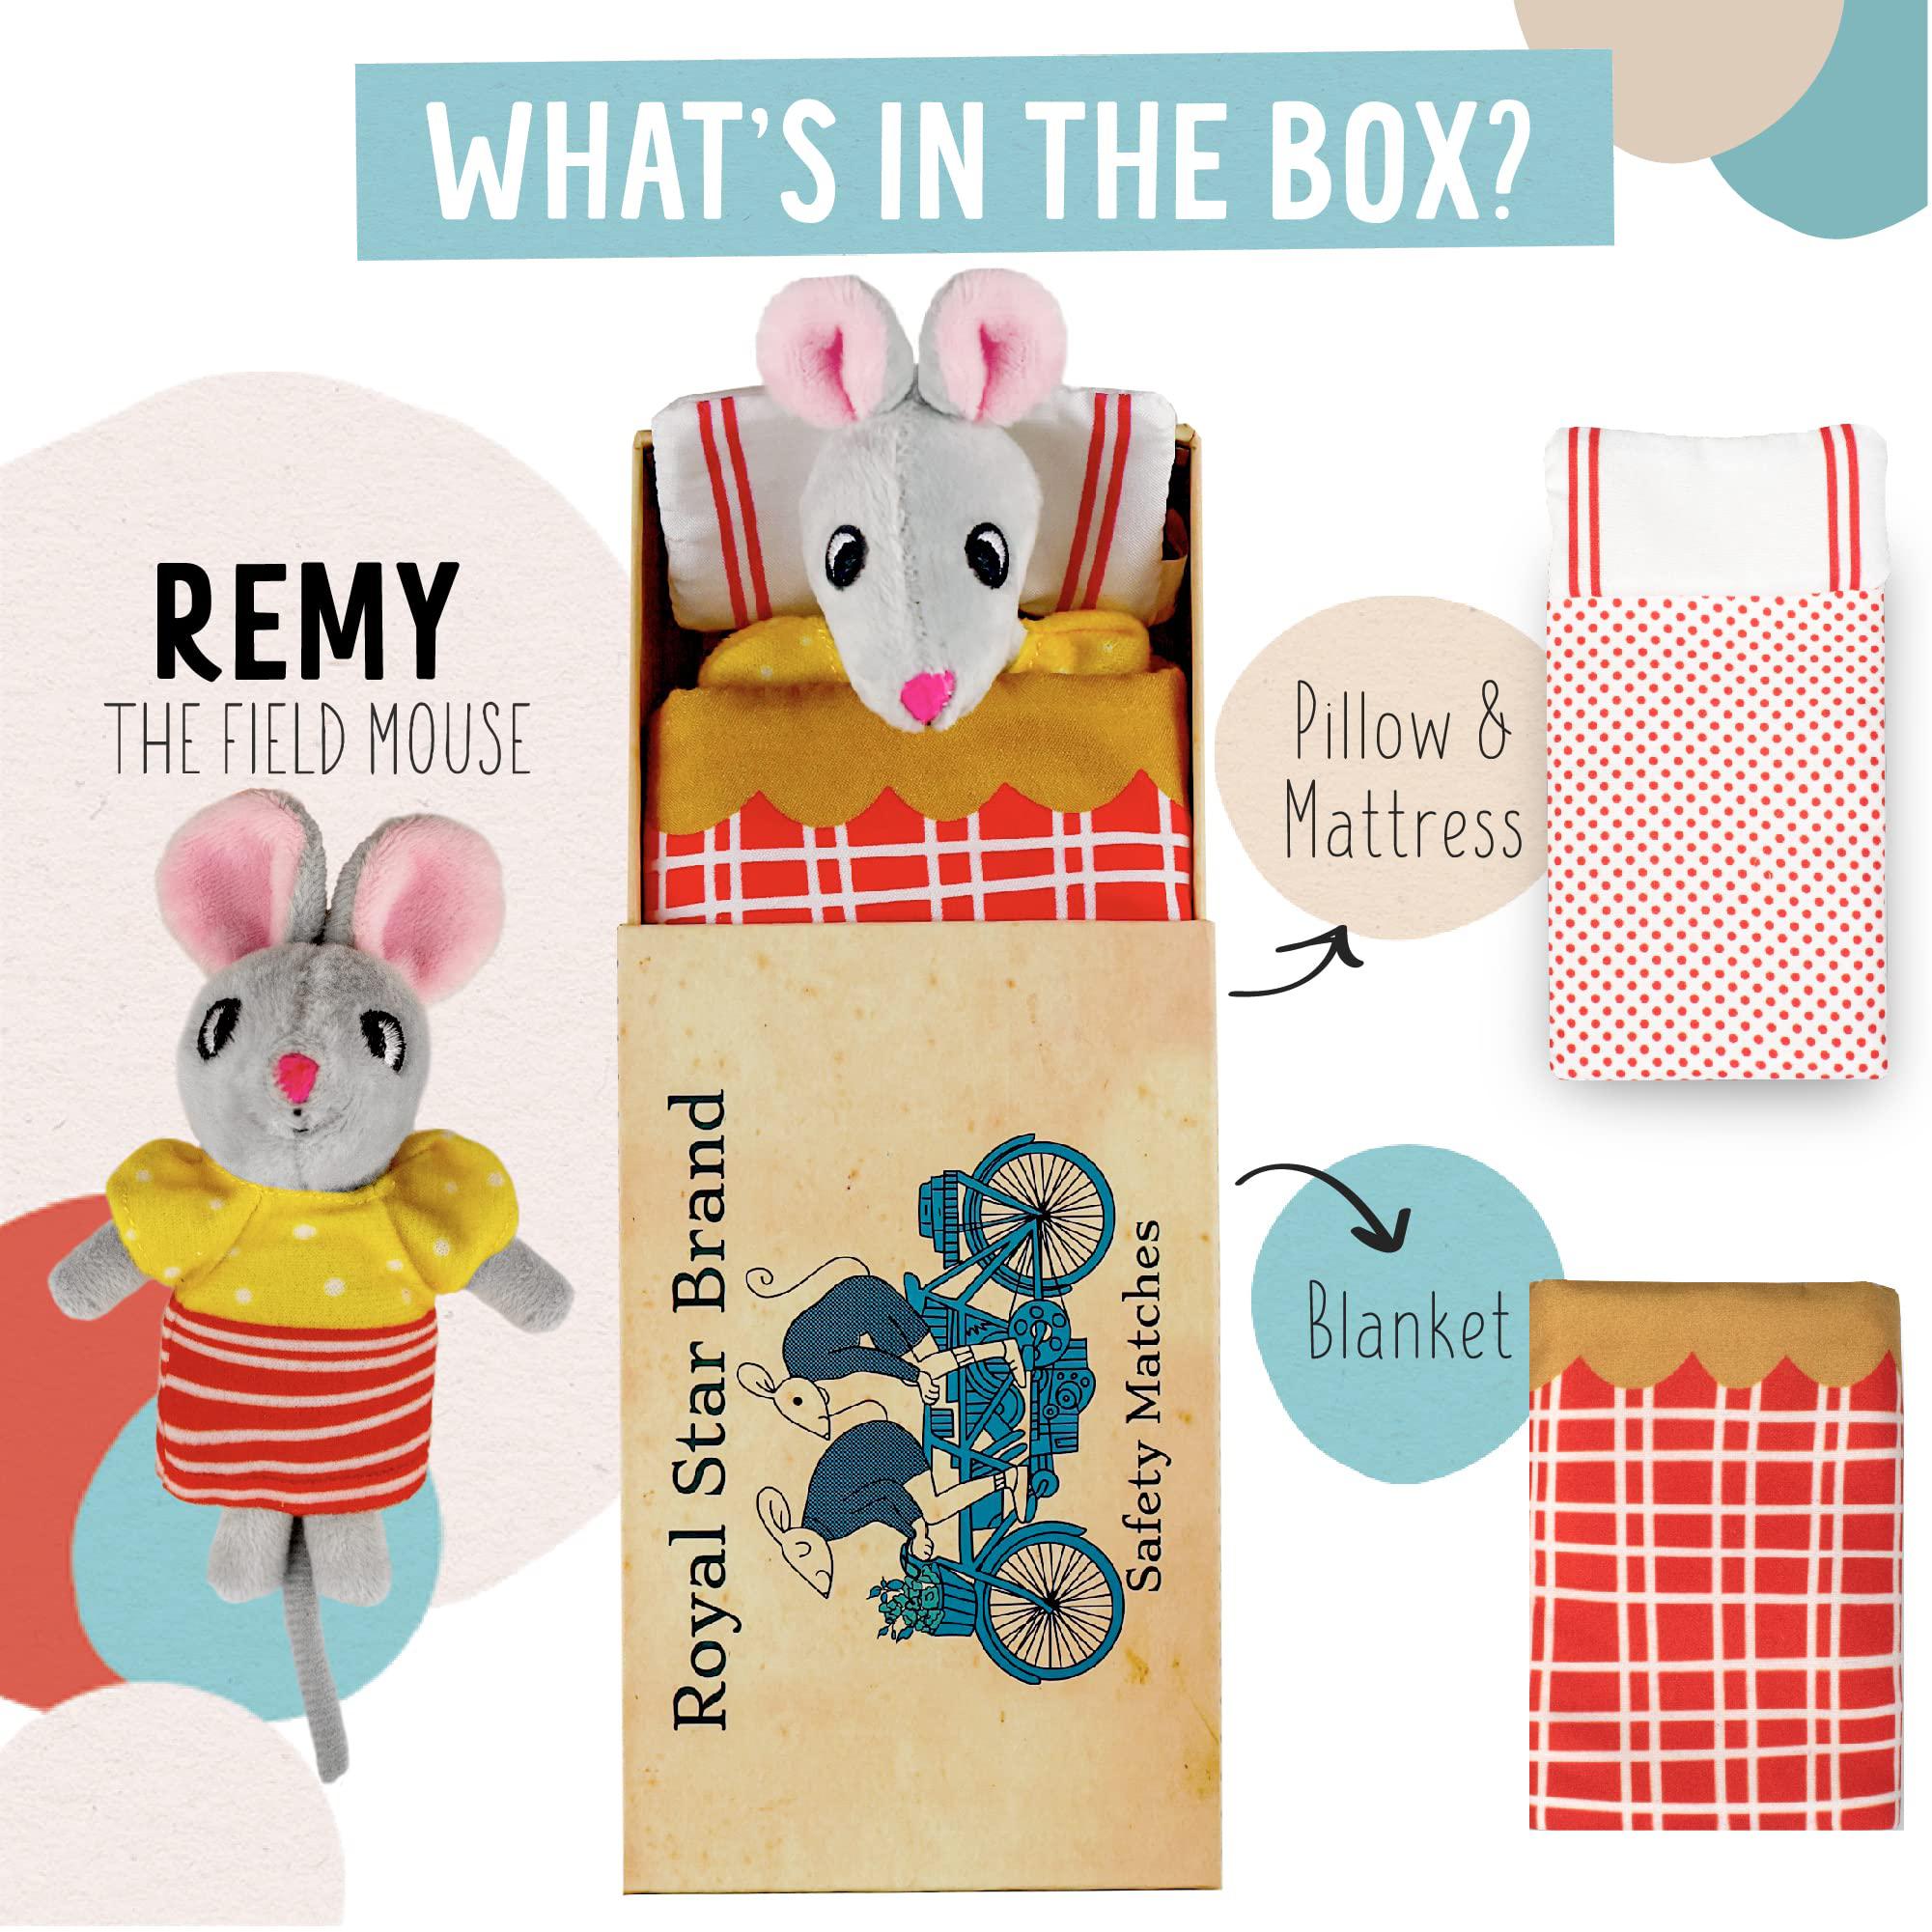 foothill toy co. mice in boxes - 'remy the house mouse' playset with stuffed animal in a match box bed